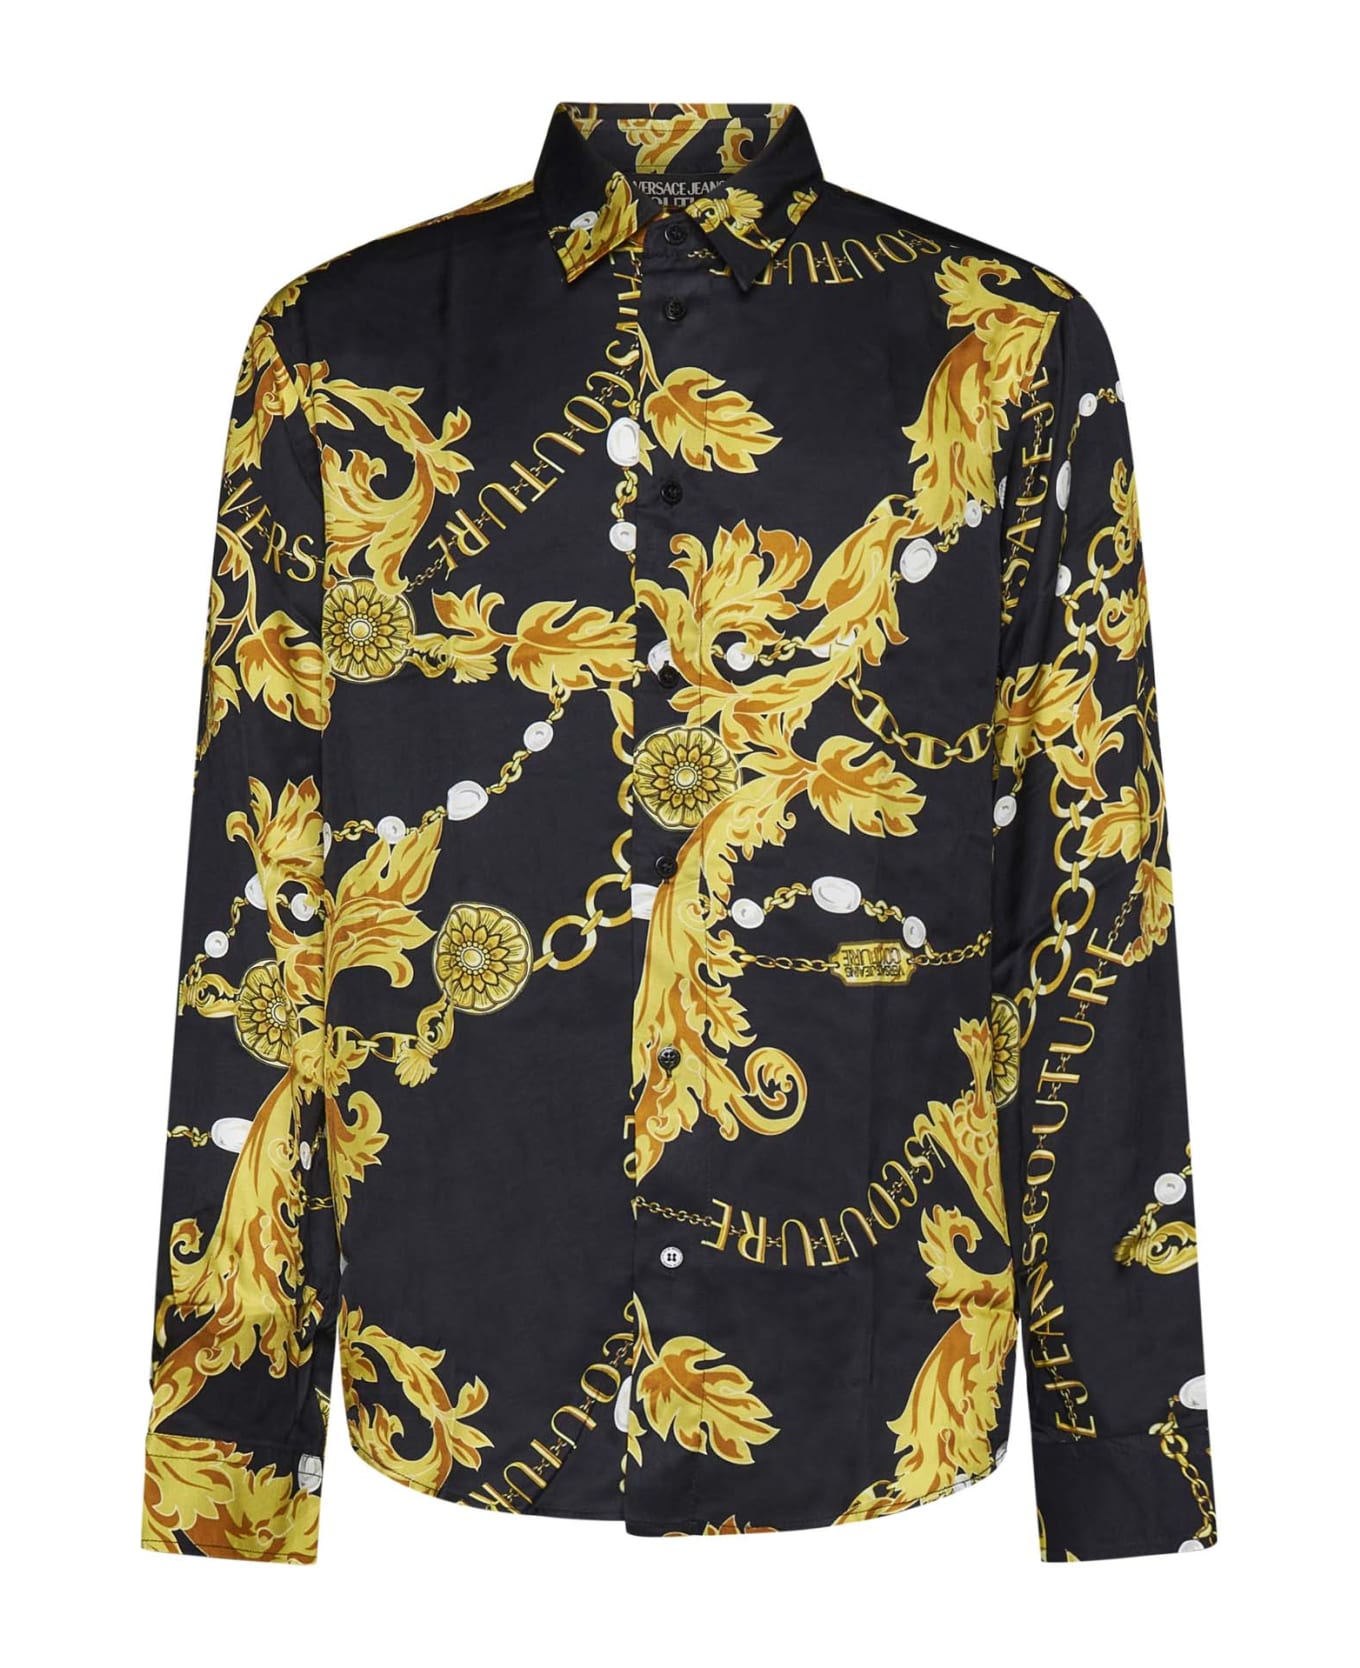 Versace Jeans Couture Shirt - Black Gold シャツ